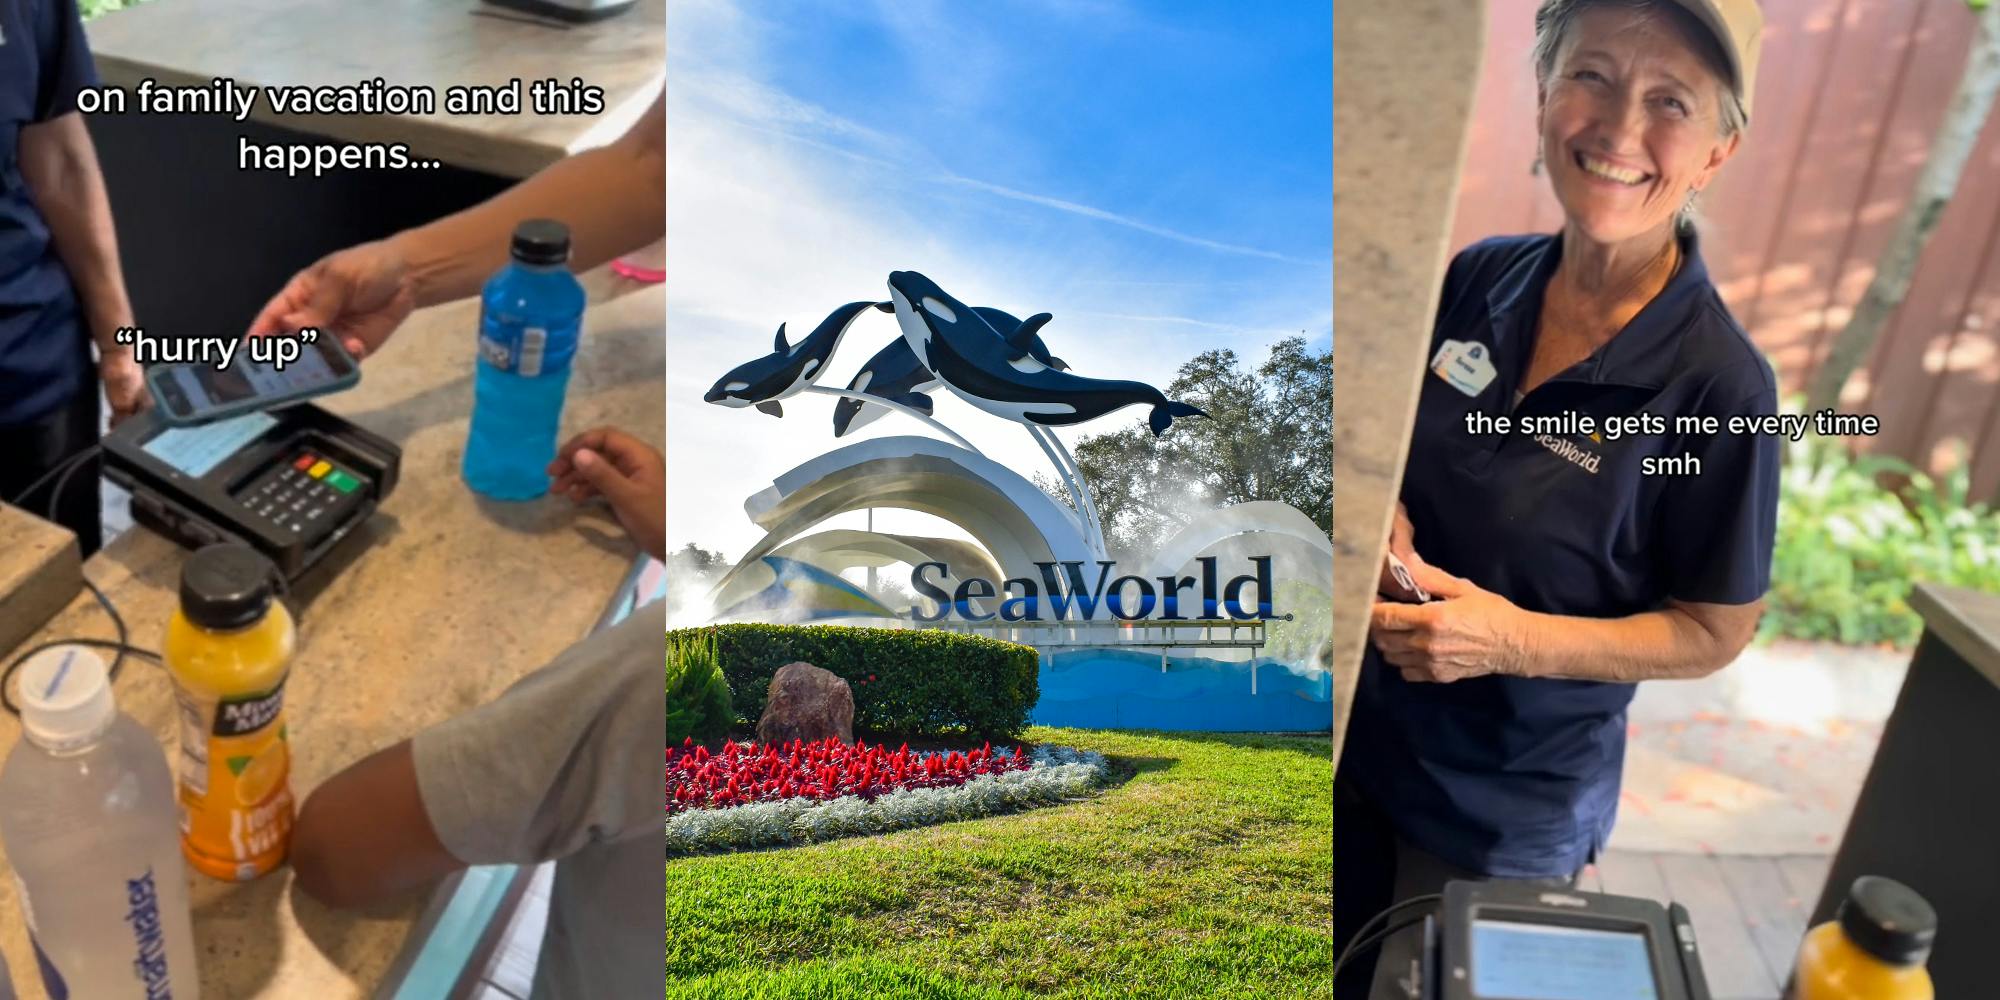 SeaWorld customers checking out with worker with caption "on family vacation and this happens... "hurry up"" (l) SeaWorld sign outside with blue sky (c) SeaWorld employee smiling with caption "the smile gets me every time smh" (r)